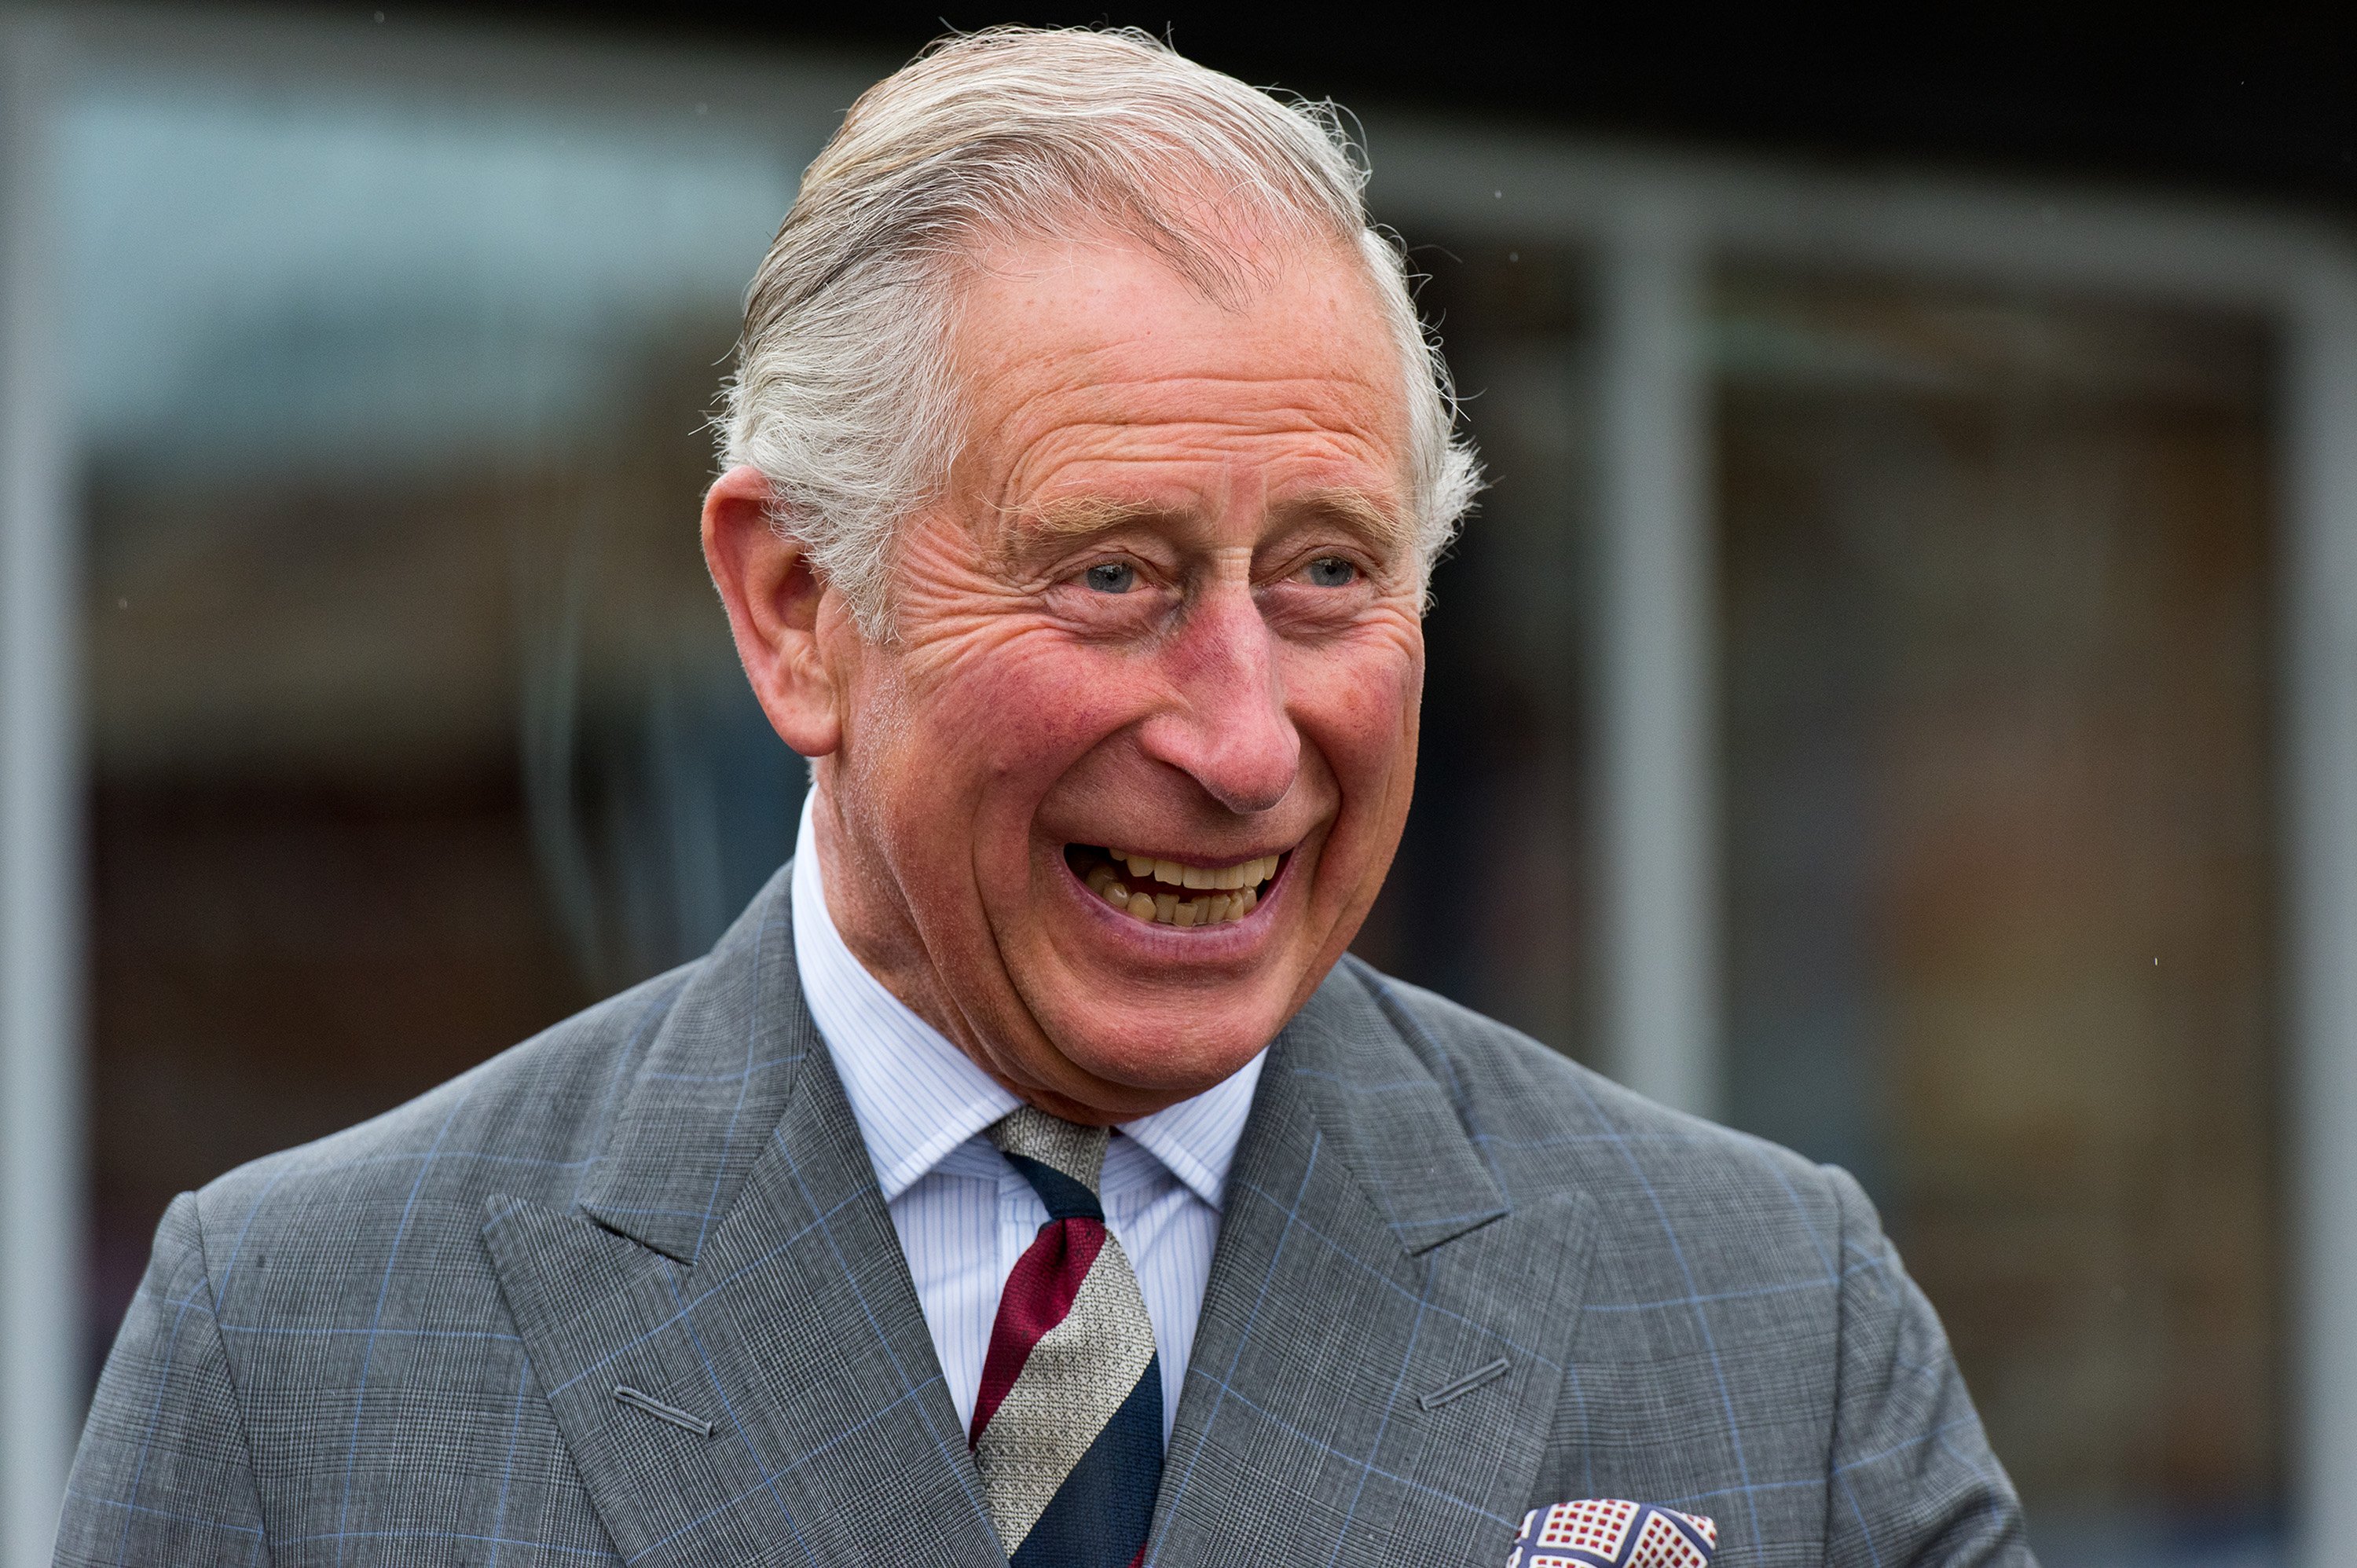 Prince Charles, Prince of Wales meets residents of The Guinness Partnership's 250th affordable home in Poundbury on May 8, 2015 in Dorchester, Dorset | Photo: Getty Images